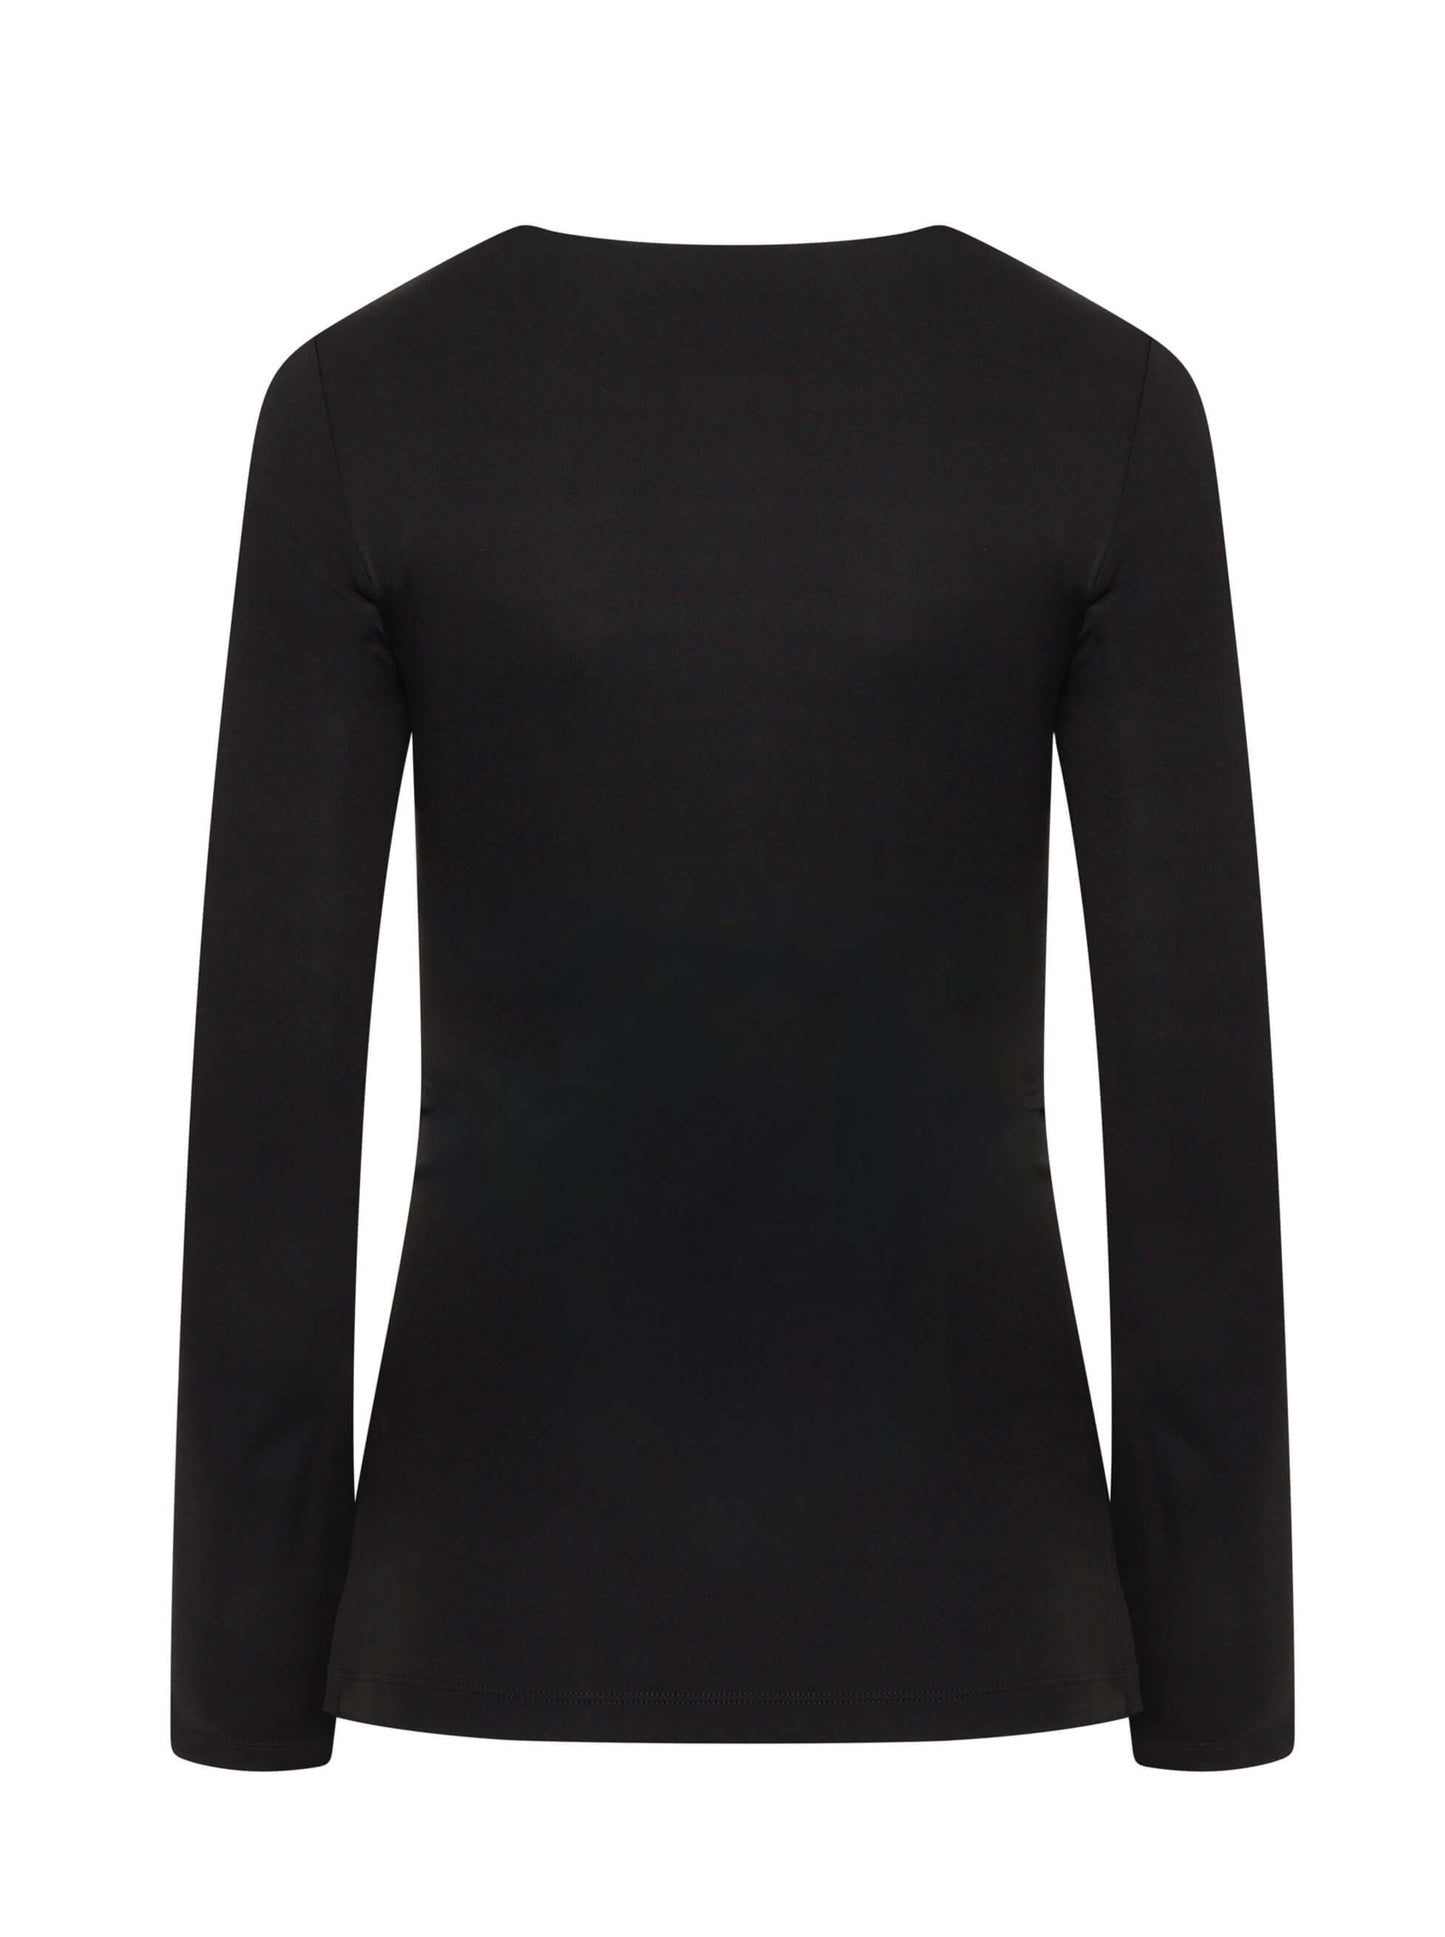 'CONNECTICUT' LONG SLEEVE ATHLEISURE TOP BLACK